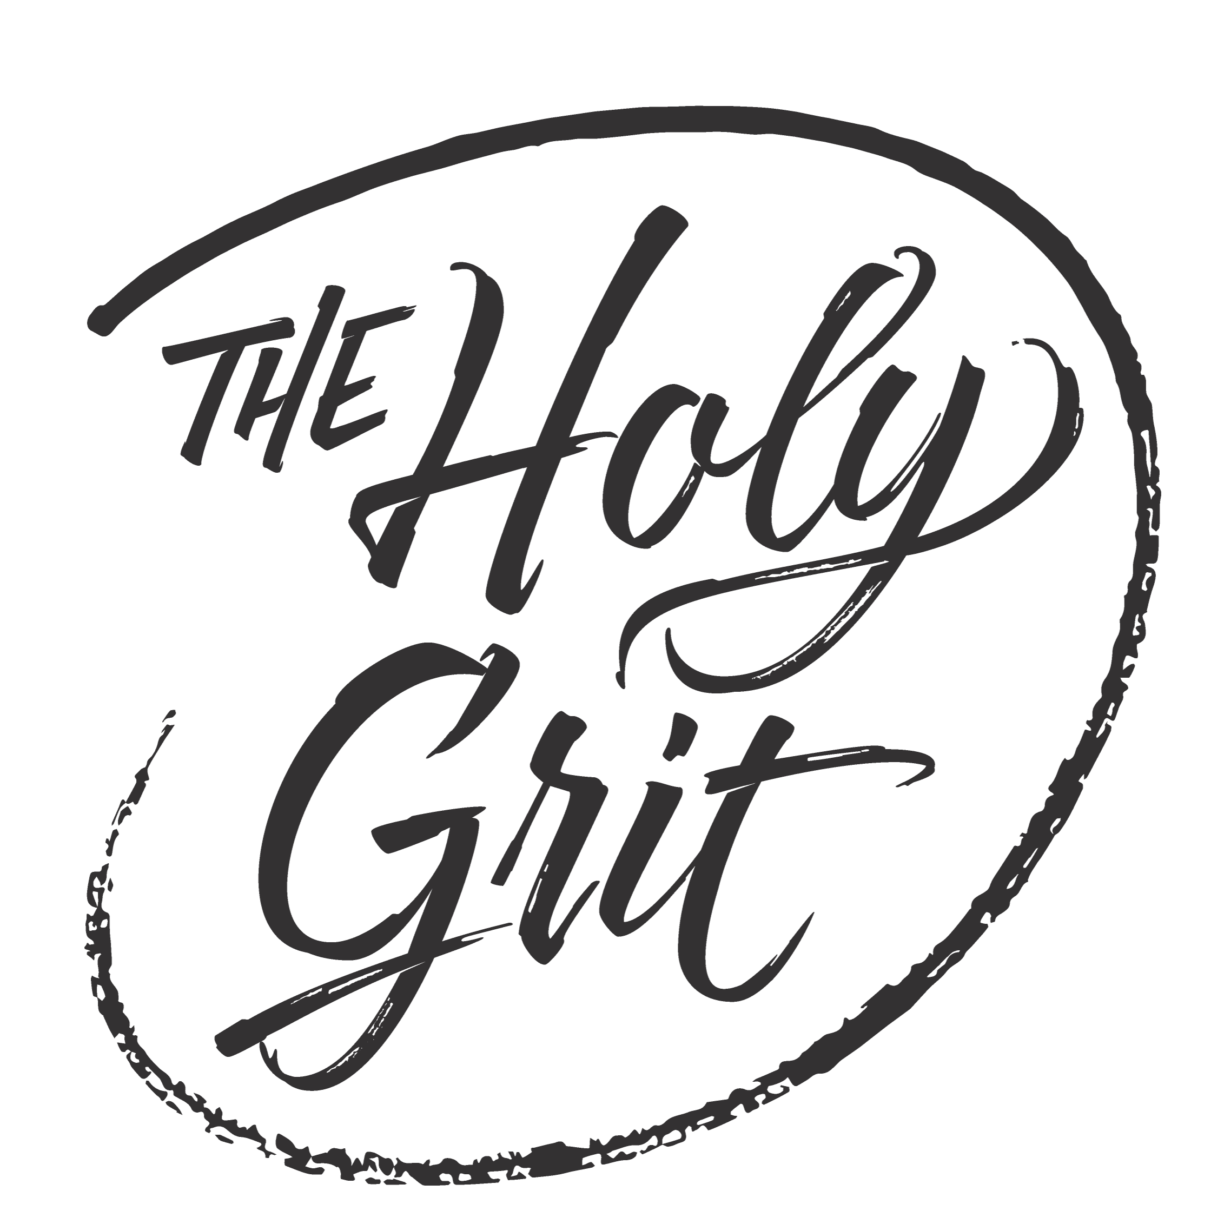 The Holy Grit